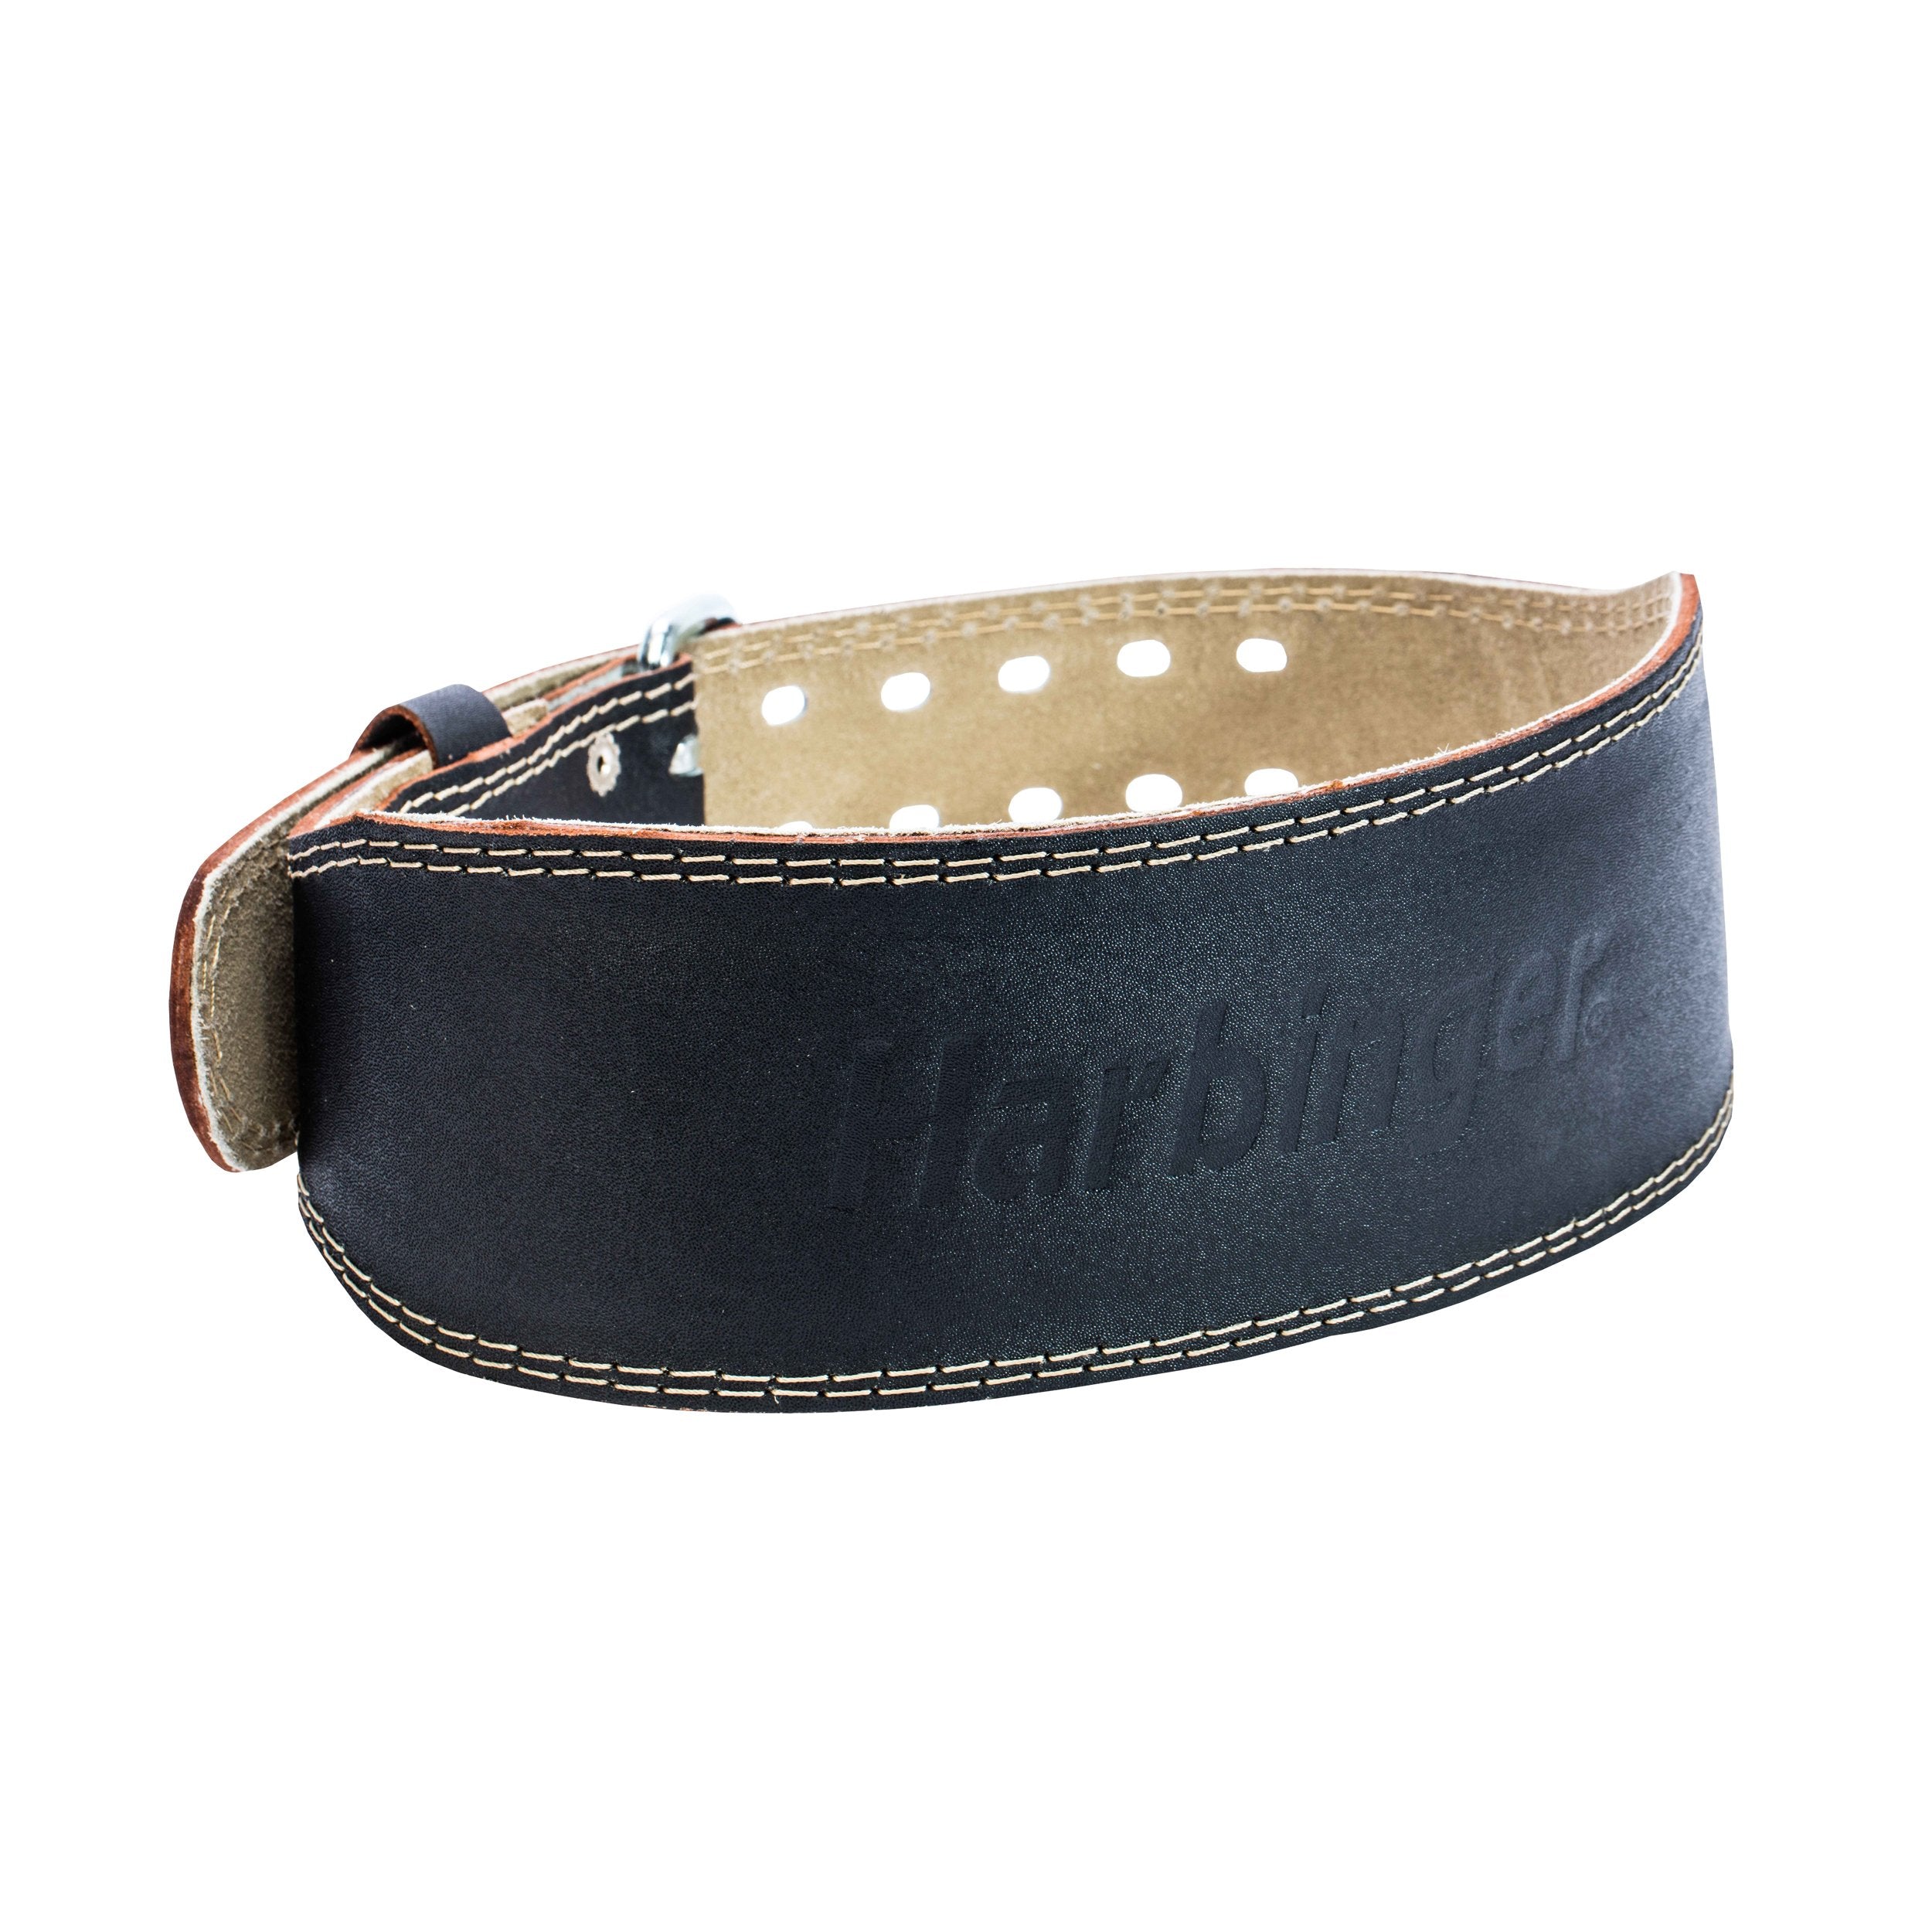 Harbinger Padded Leather Contoured Weightlifting Belt with Suede Lining and Steel Roller Buckle, 4-Inch, Large